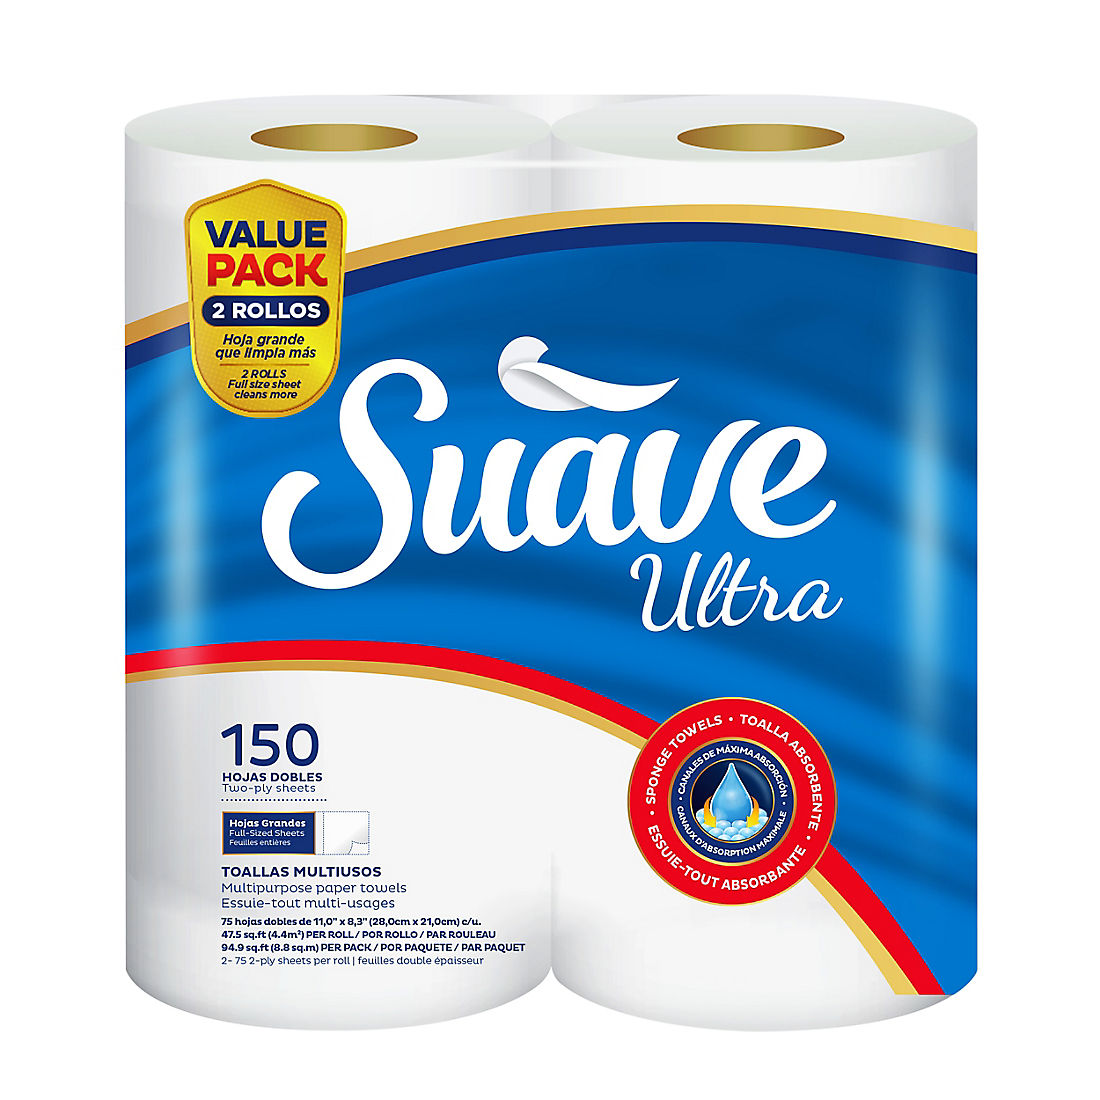 Suave Hand Cleaning Wipes 10 pcs 5-PACK